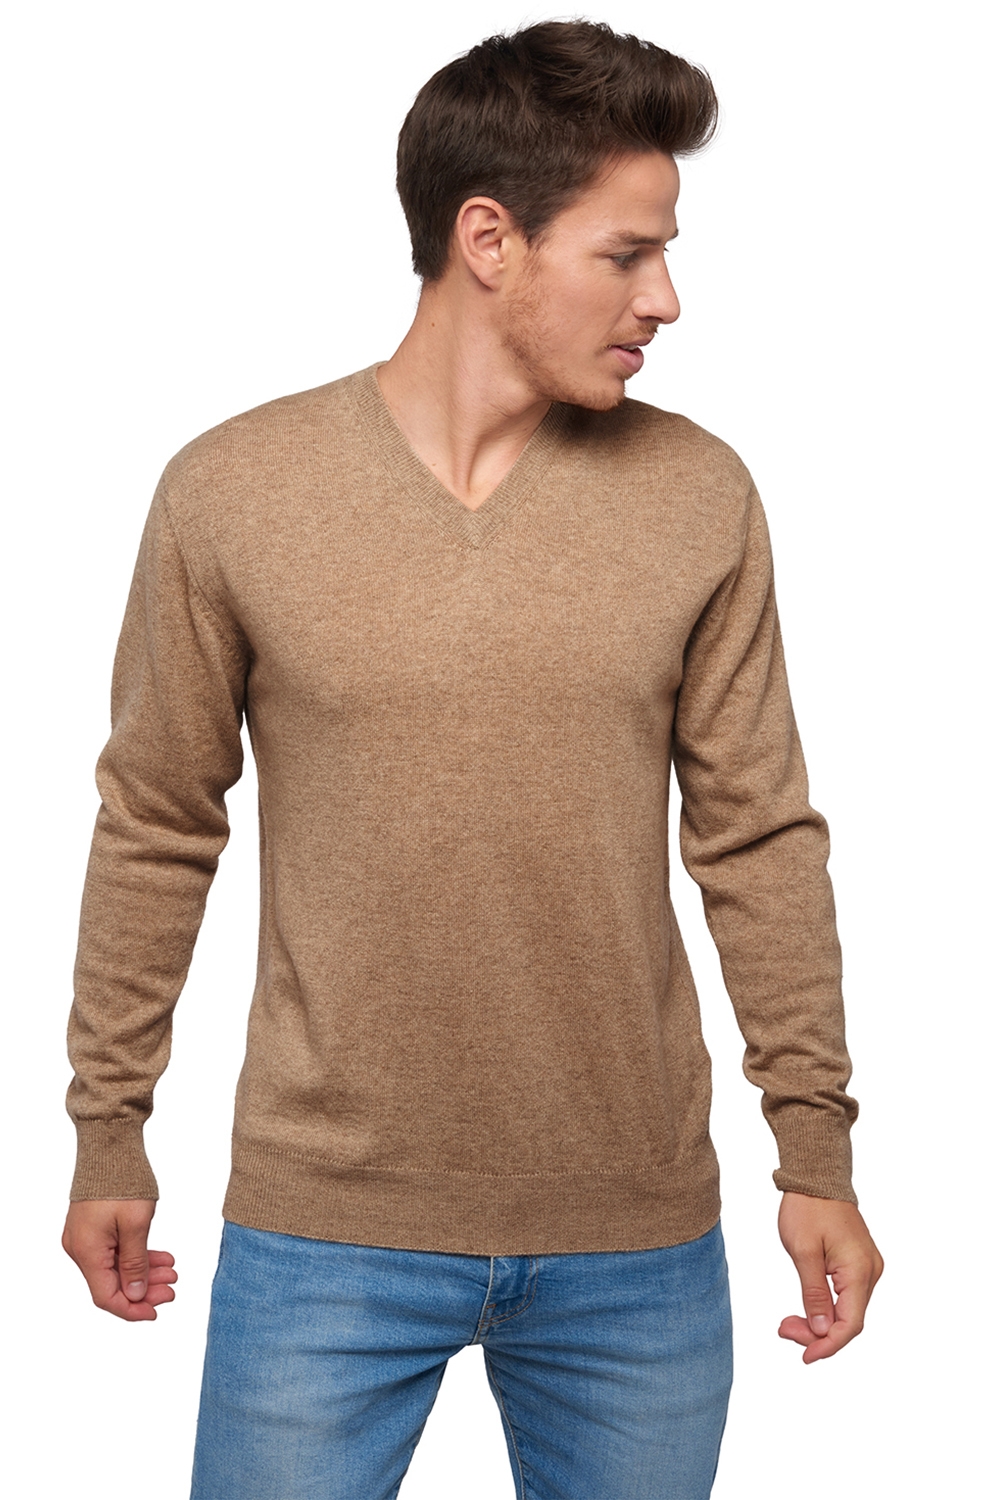 Cachemire Naturel pull homme epais natural poppy 4f natural brown 2xl